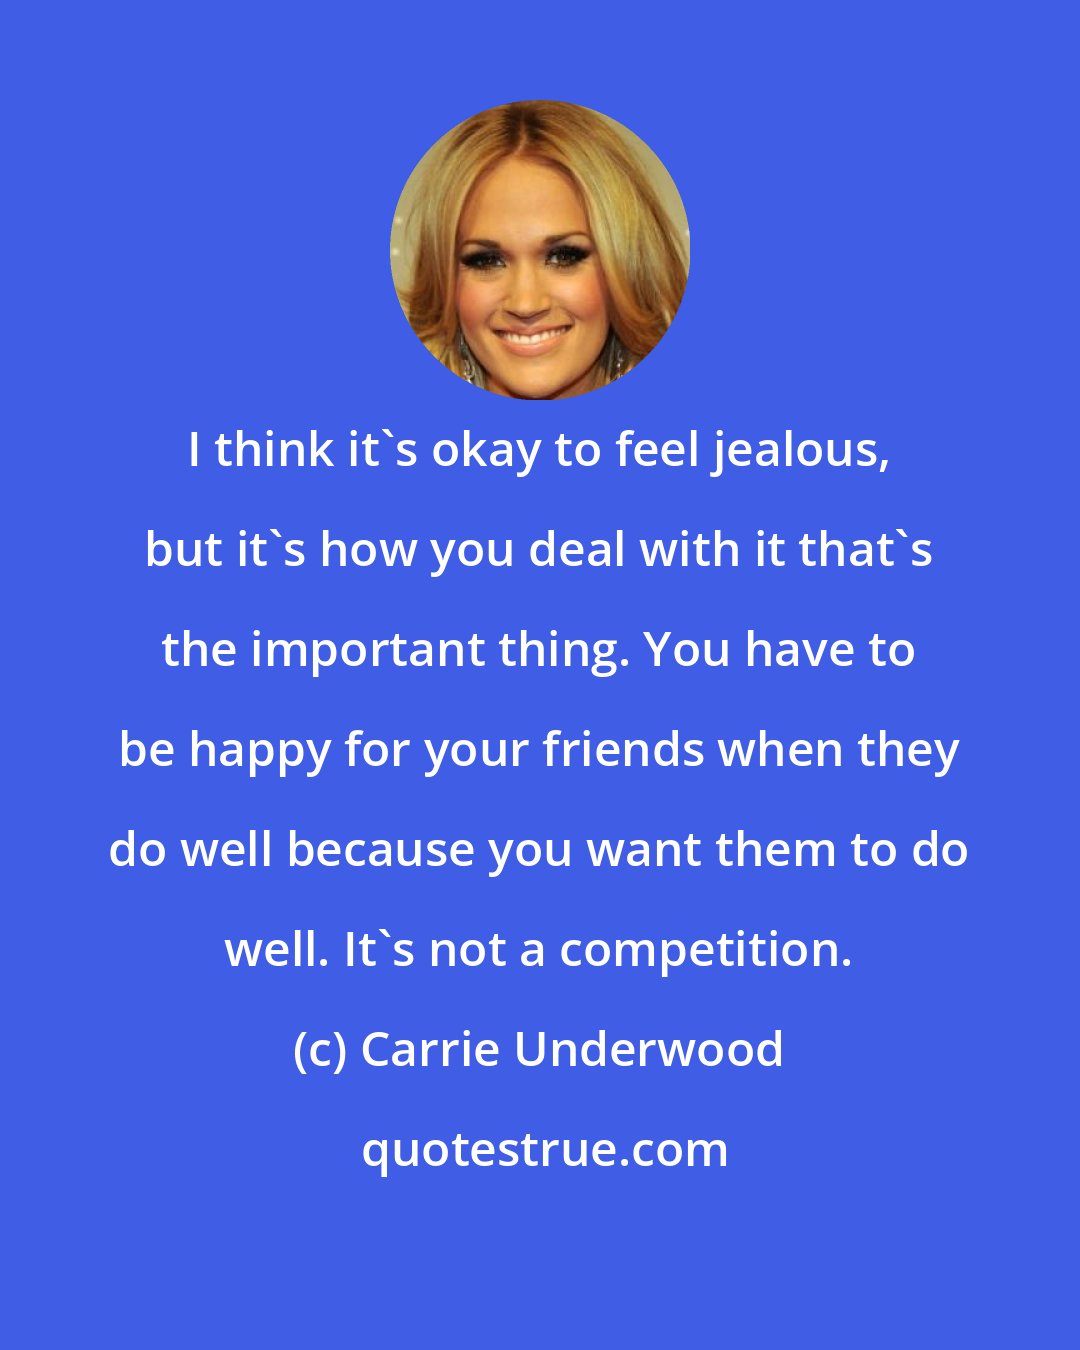 Carrie Underwood: I think it's okay to feel jealous, but it's how you deal with it that's the important thing. You have to be happy for your friends when they do well because you want them to do well. It's not a competition.